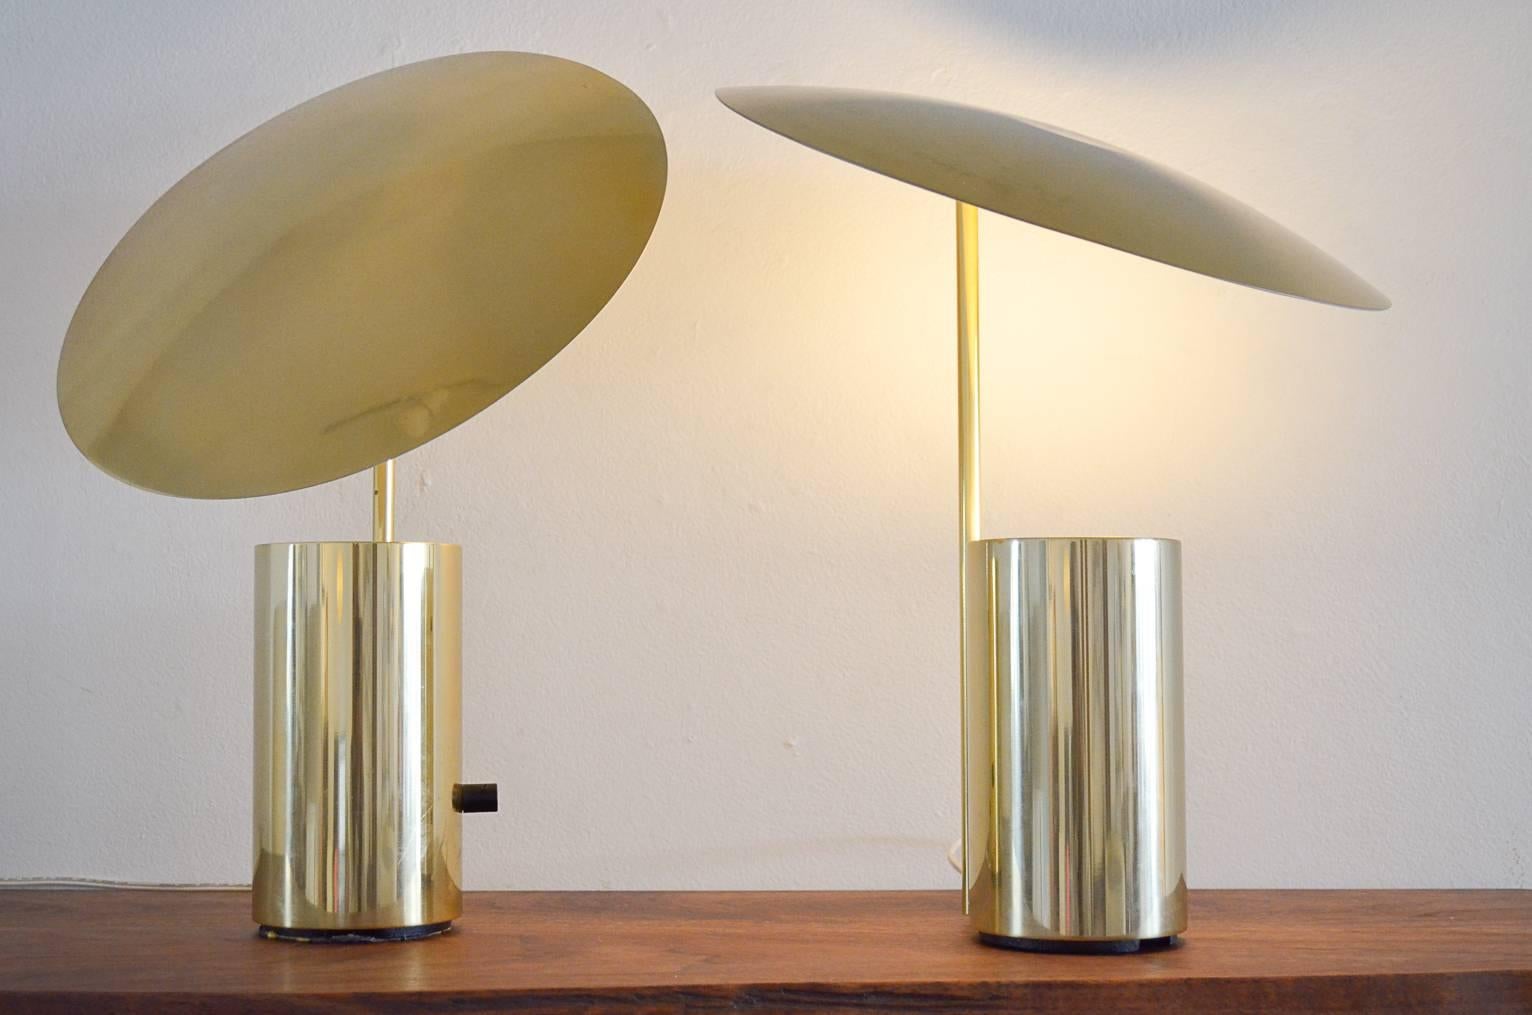 Extremely rare matching pair of authentic George Nelson 'Half-Nelson' brass table lamps by Koch and Lowy. Very good original condition, very light wear on one switch otherwise excellent. Original shades, wiring.

Each measure: 15